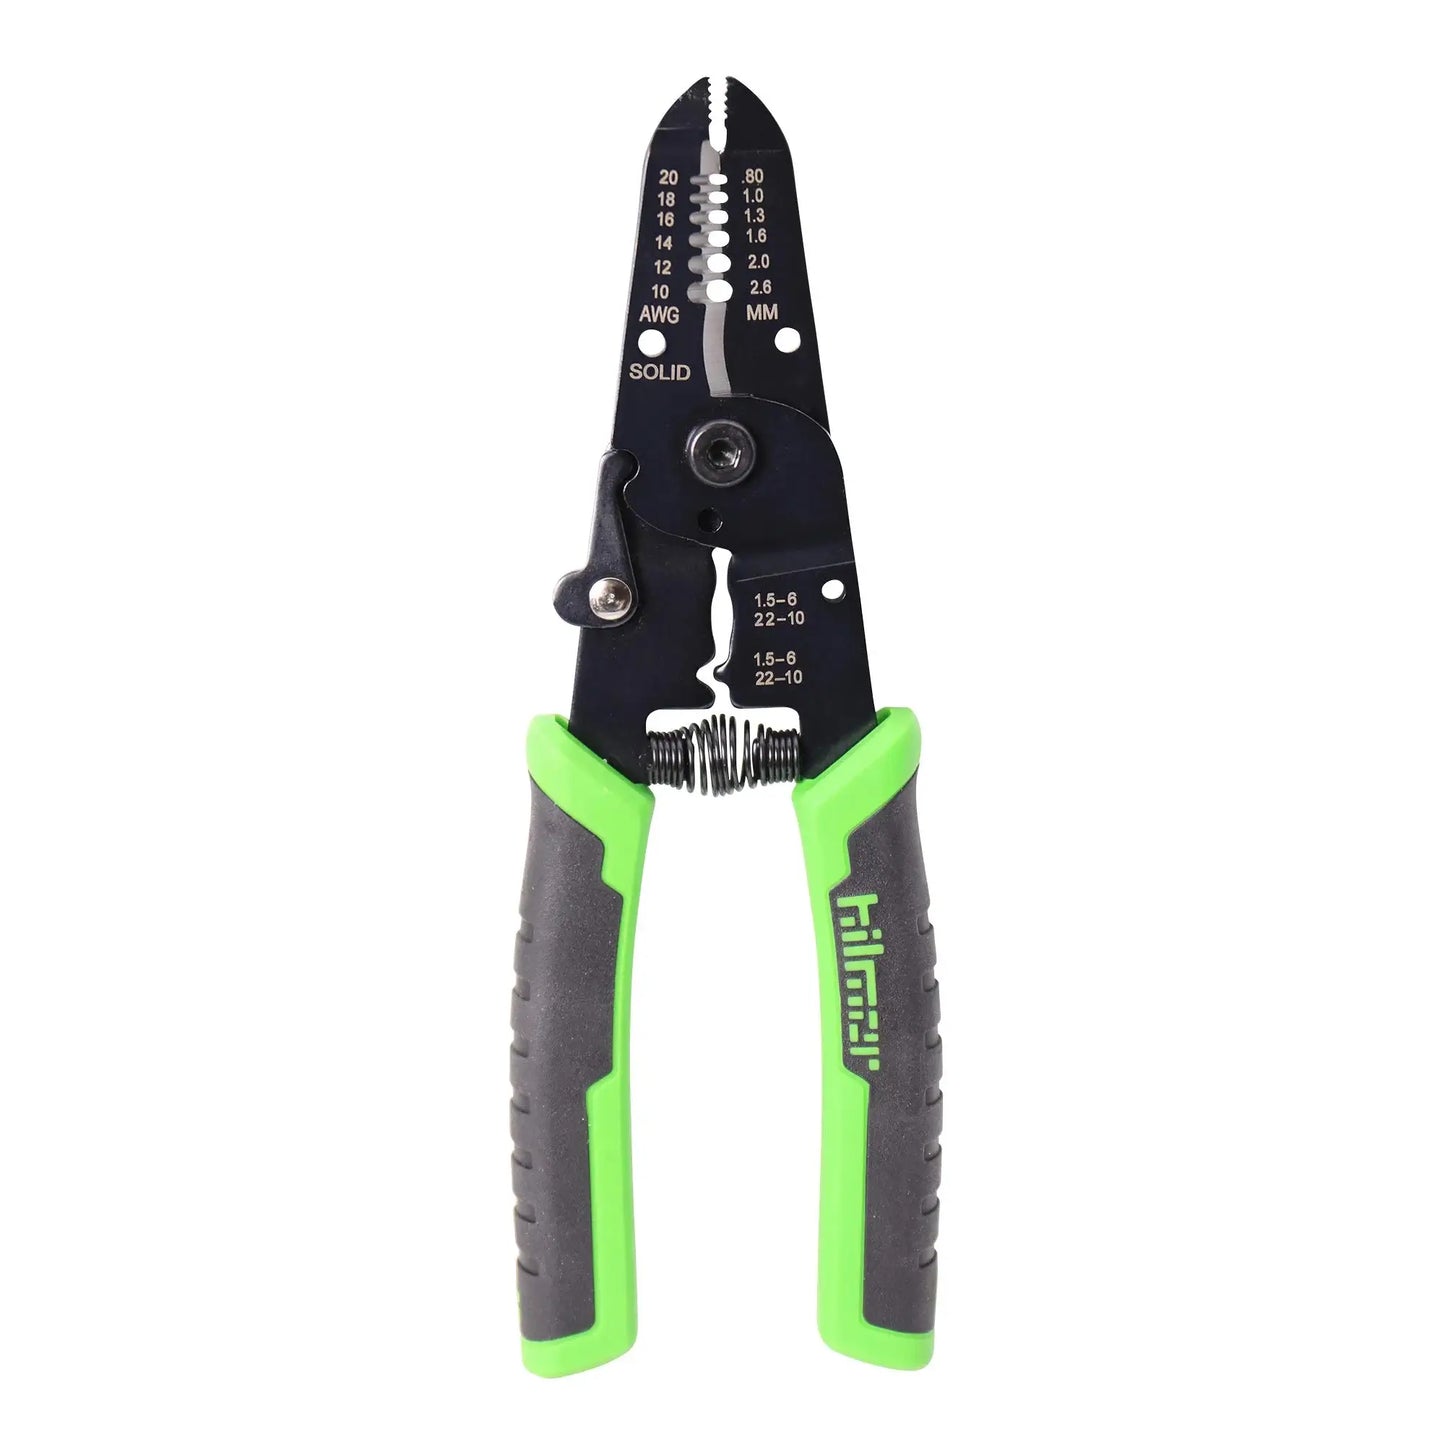 Hilmor 7 Wire Stripper with Rubber Handle Grip, Black & Green, WS7 1885426 Fourth